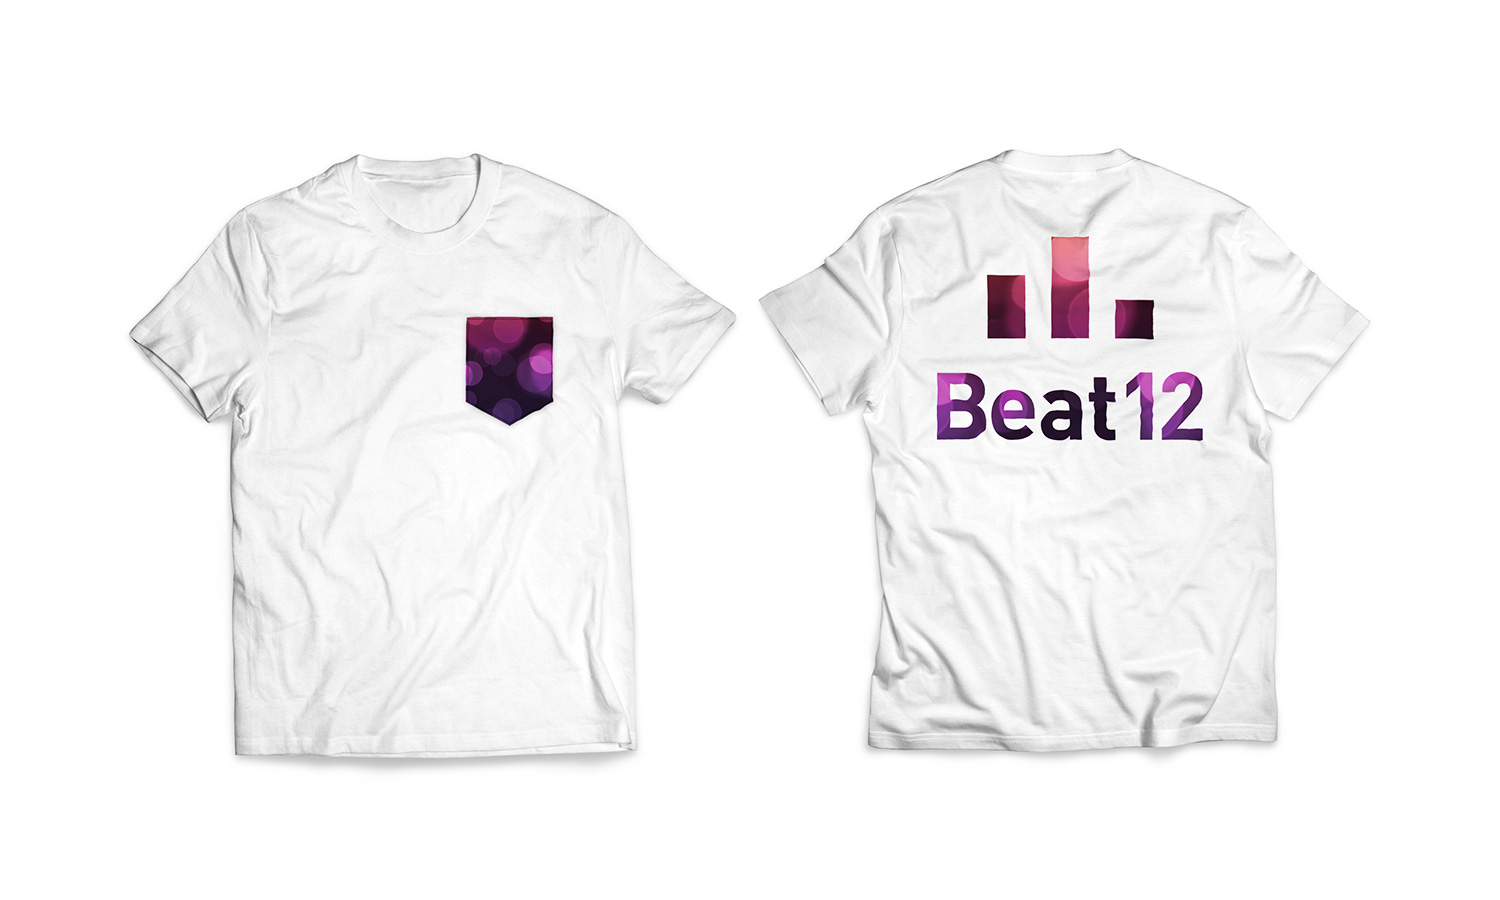 Beat12 t-shirt front and back by Viktor Lanneld